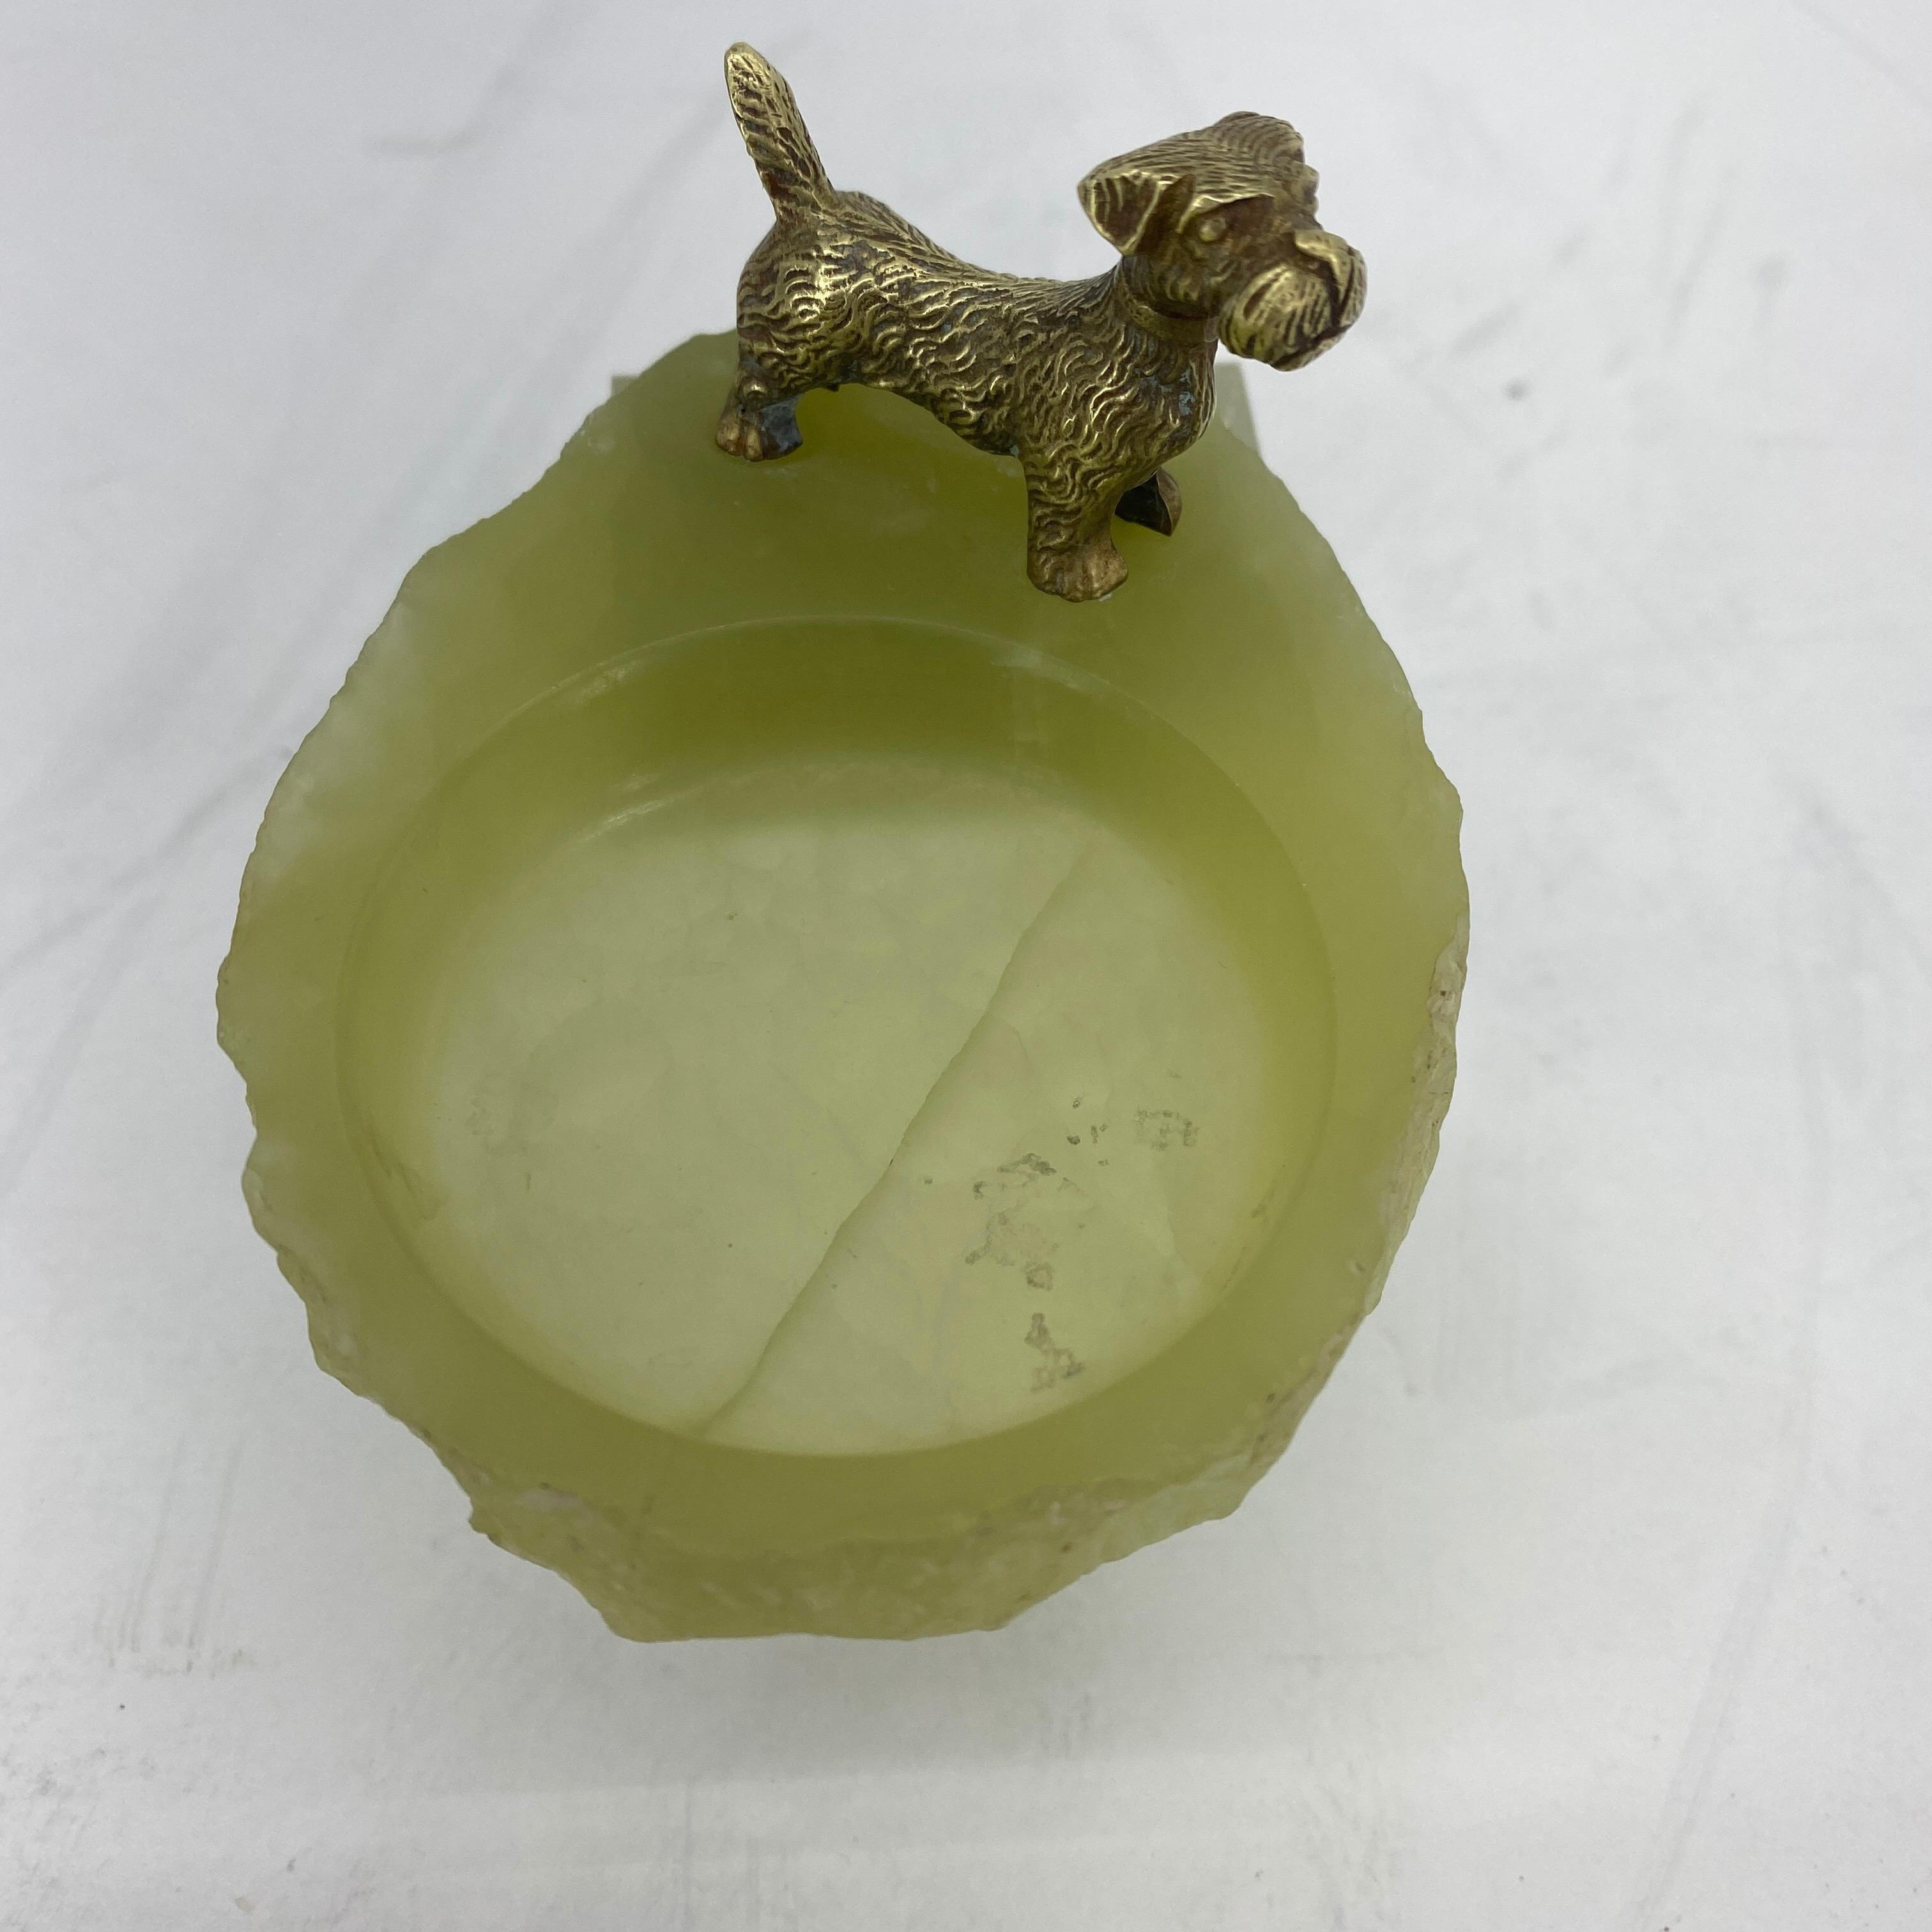 Pistachio Green Onyx and Bronze Terrier Ashtray or Jewelry Tray 12